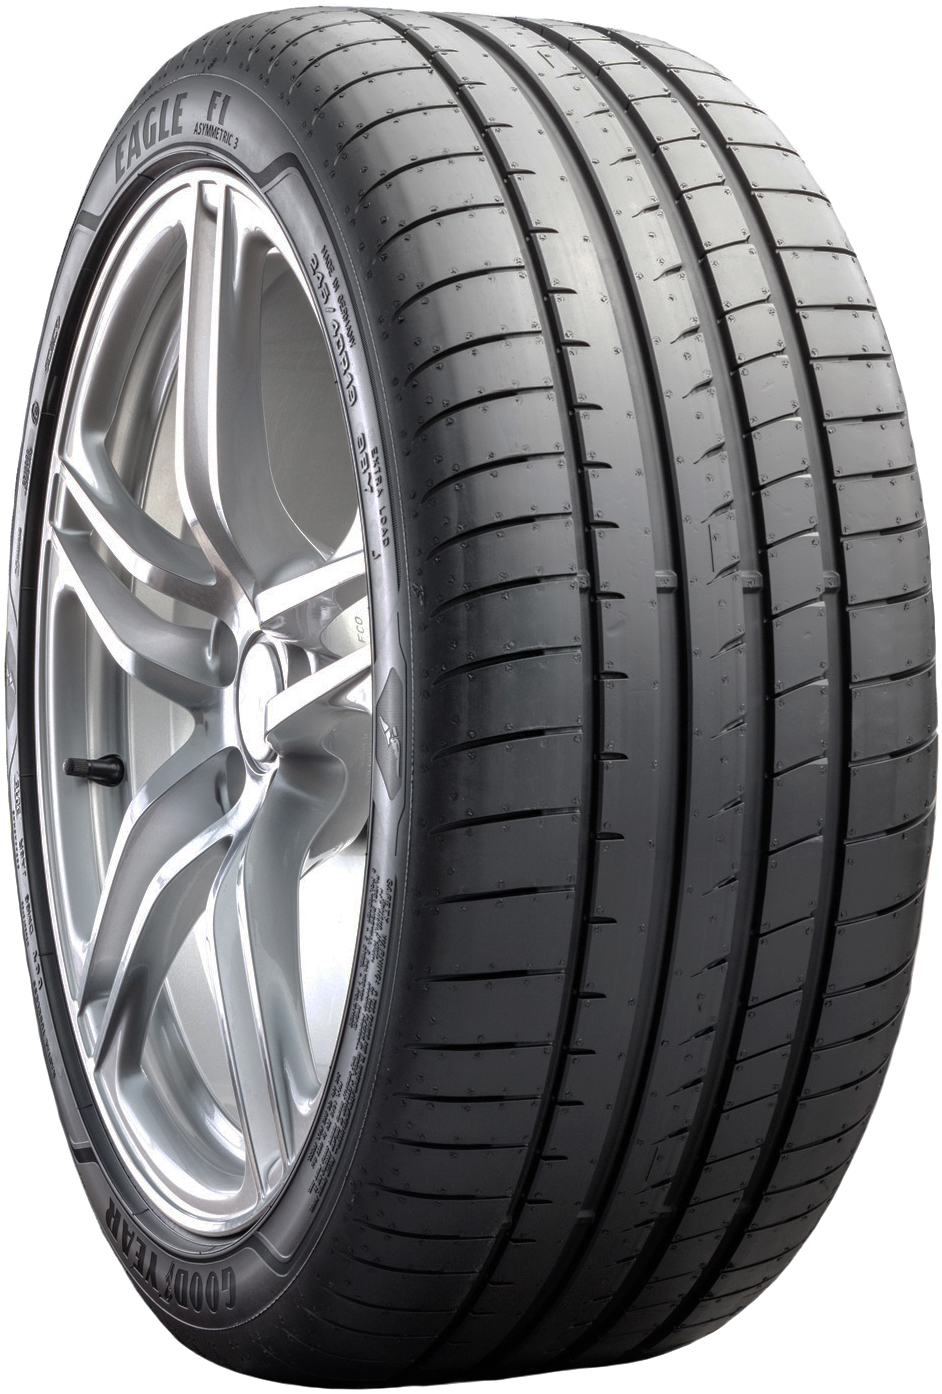 Anvelope auto GOODYEAR EAGF1AS3MX XL MERCEDES FP 245/45 R18 100Y